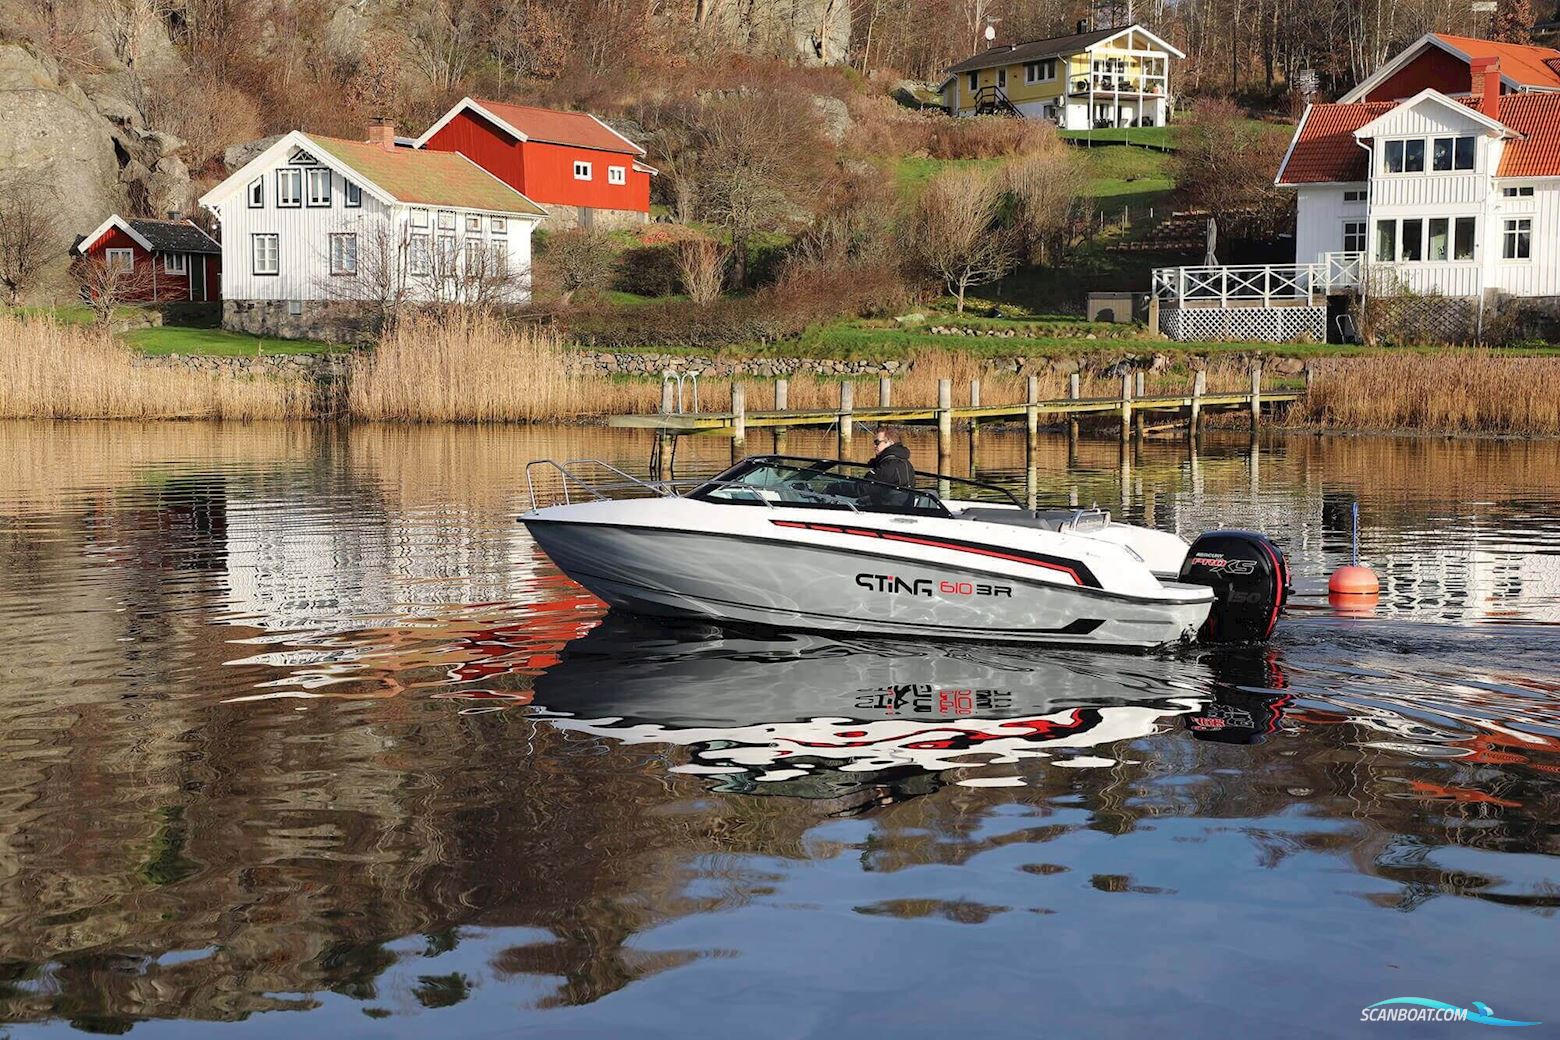 STING 610 BR Motor boat 2022, with Mercury ProXs 150 hk (-24) engine, Sweden